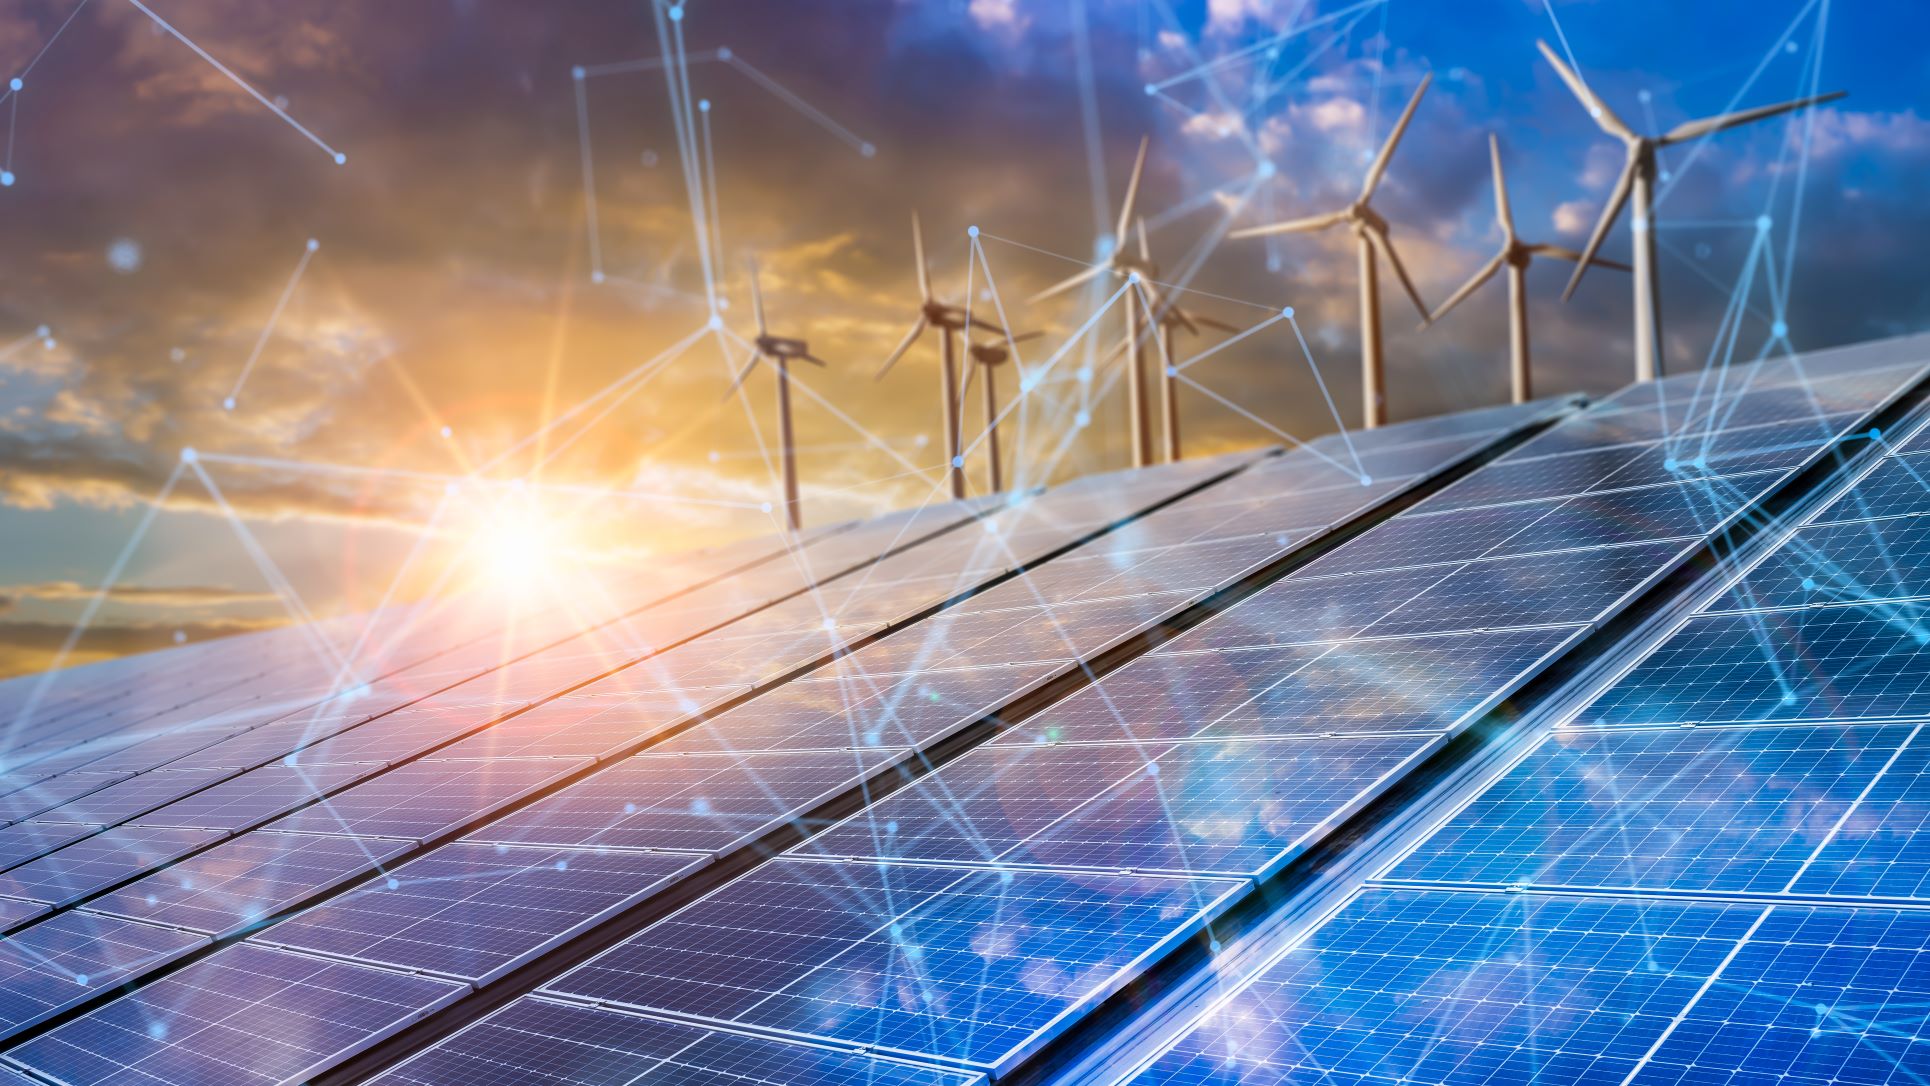 Featured image for “cQuant.io Energy Analytics Platform to Use the Power of Microsoft Azure in Helping Companies Understand and Manage Uncertainty in Renewable Energy Purchases”